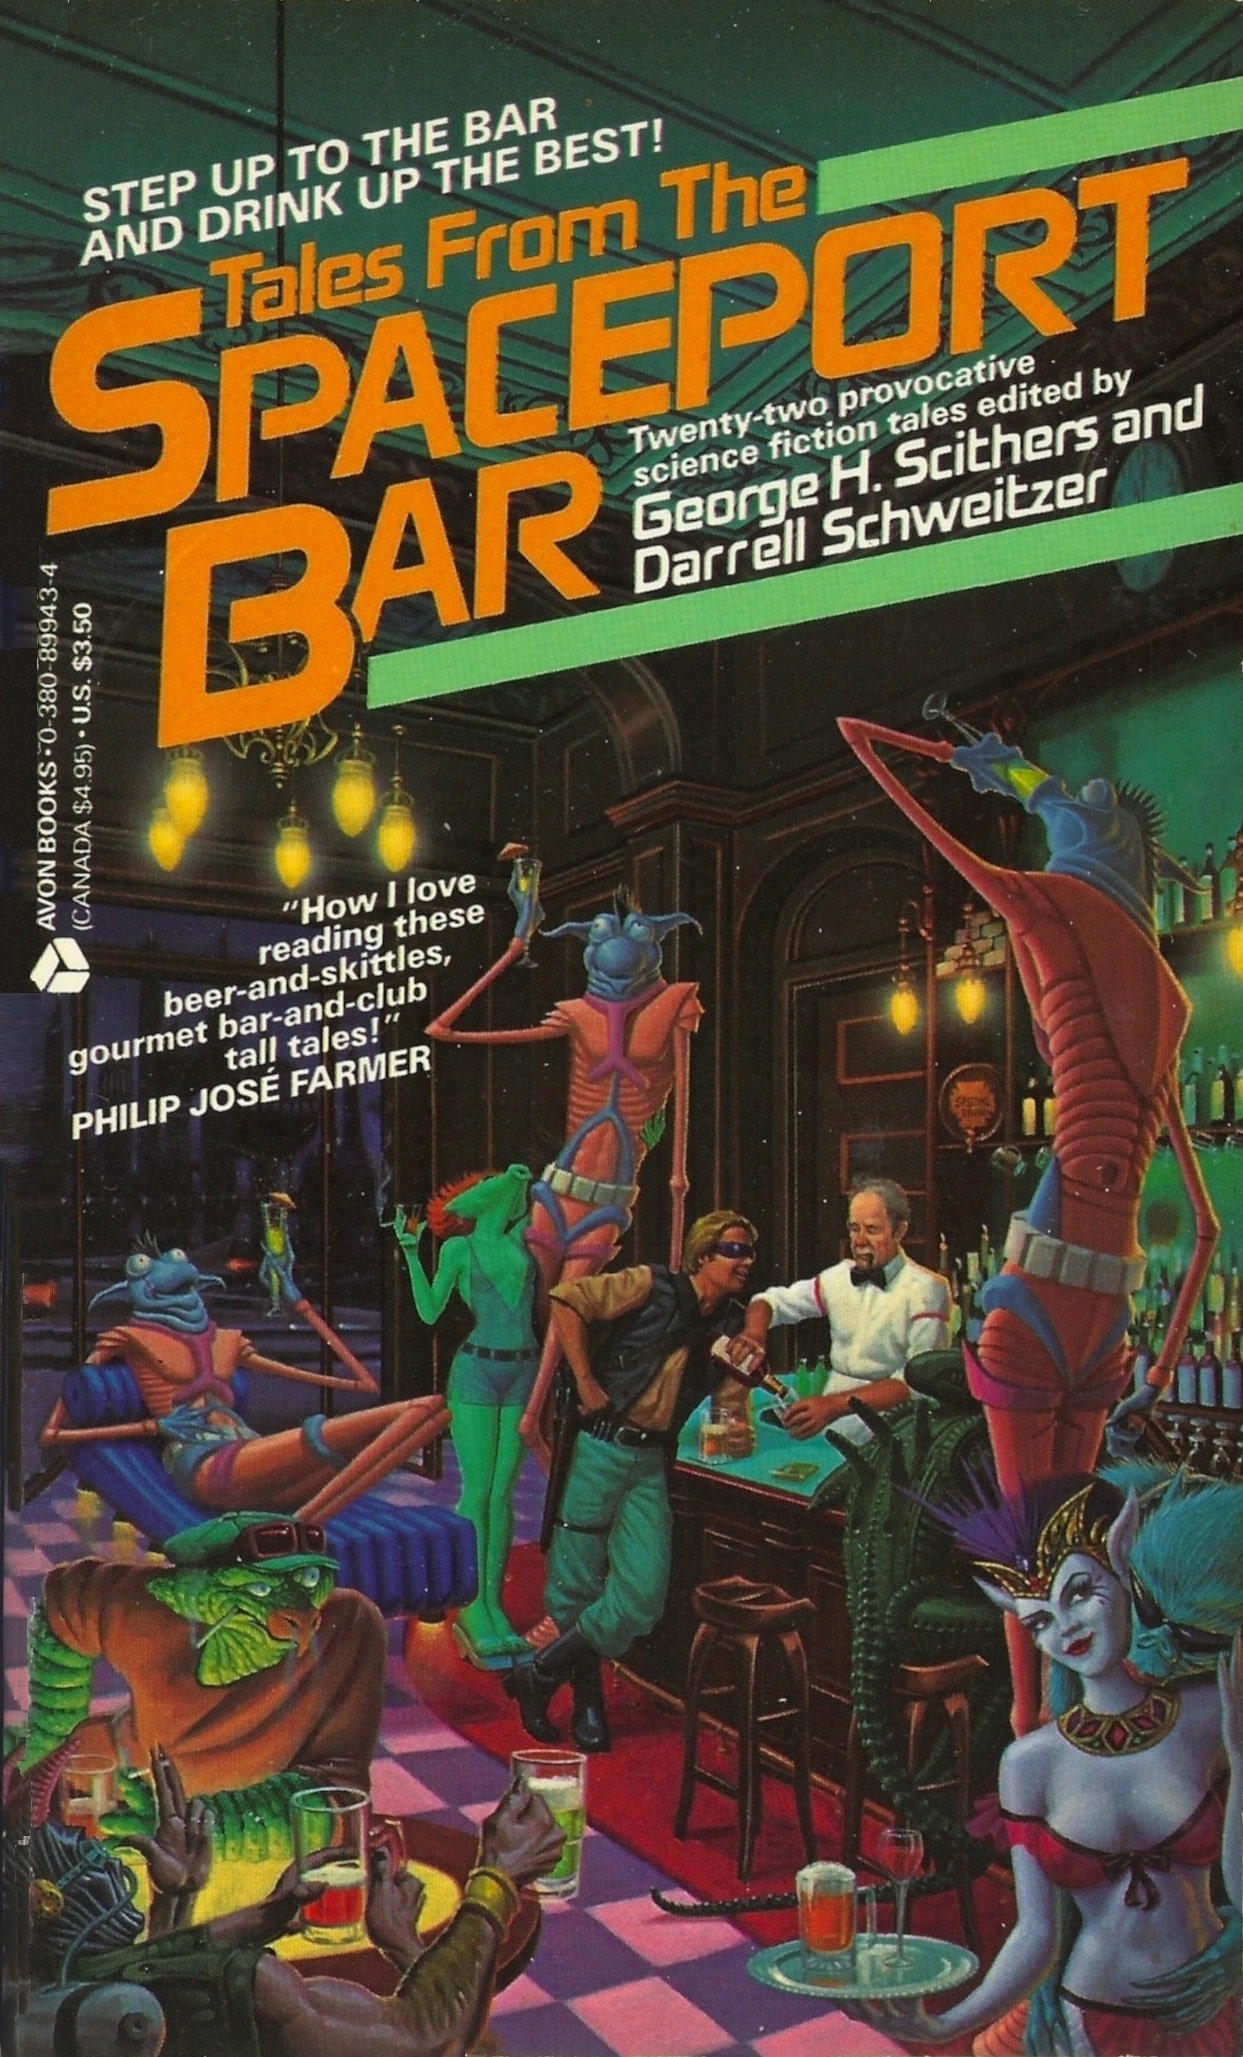 Vintage Treasures: Tales from the Spaceport Bar edited by George H. Scithers and Darrell Schweitzer